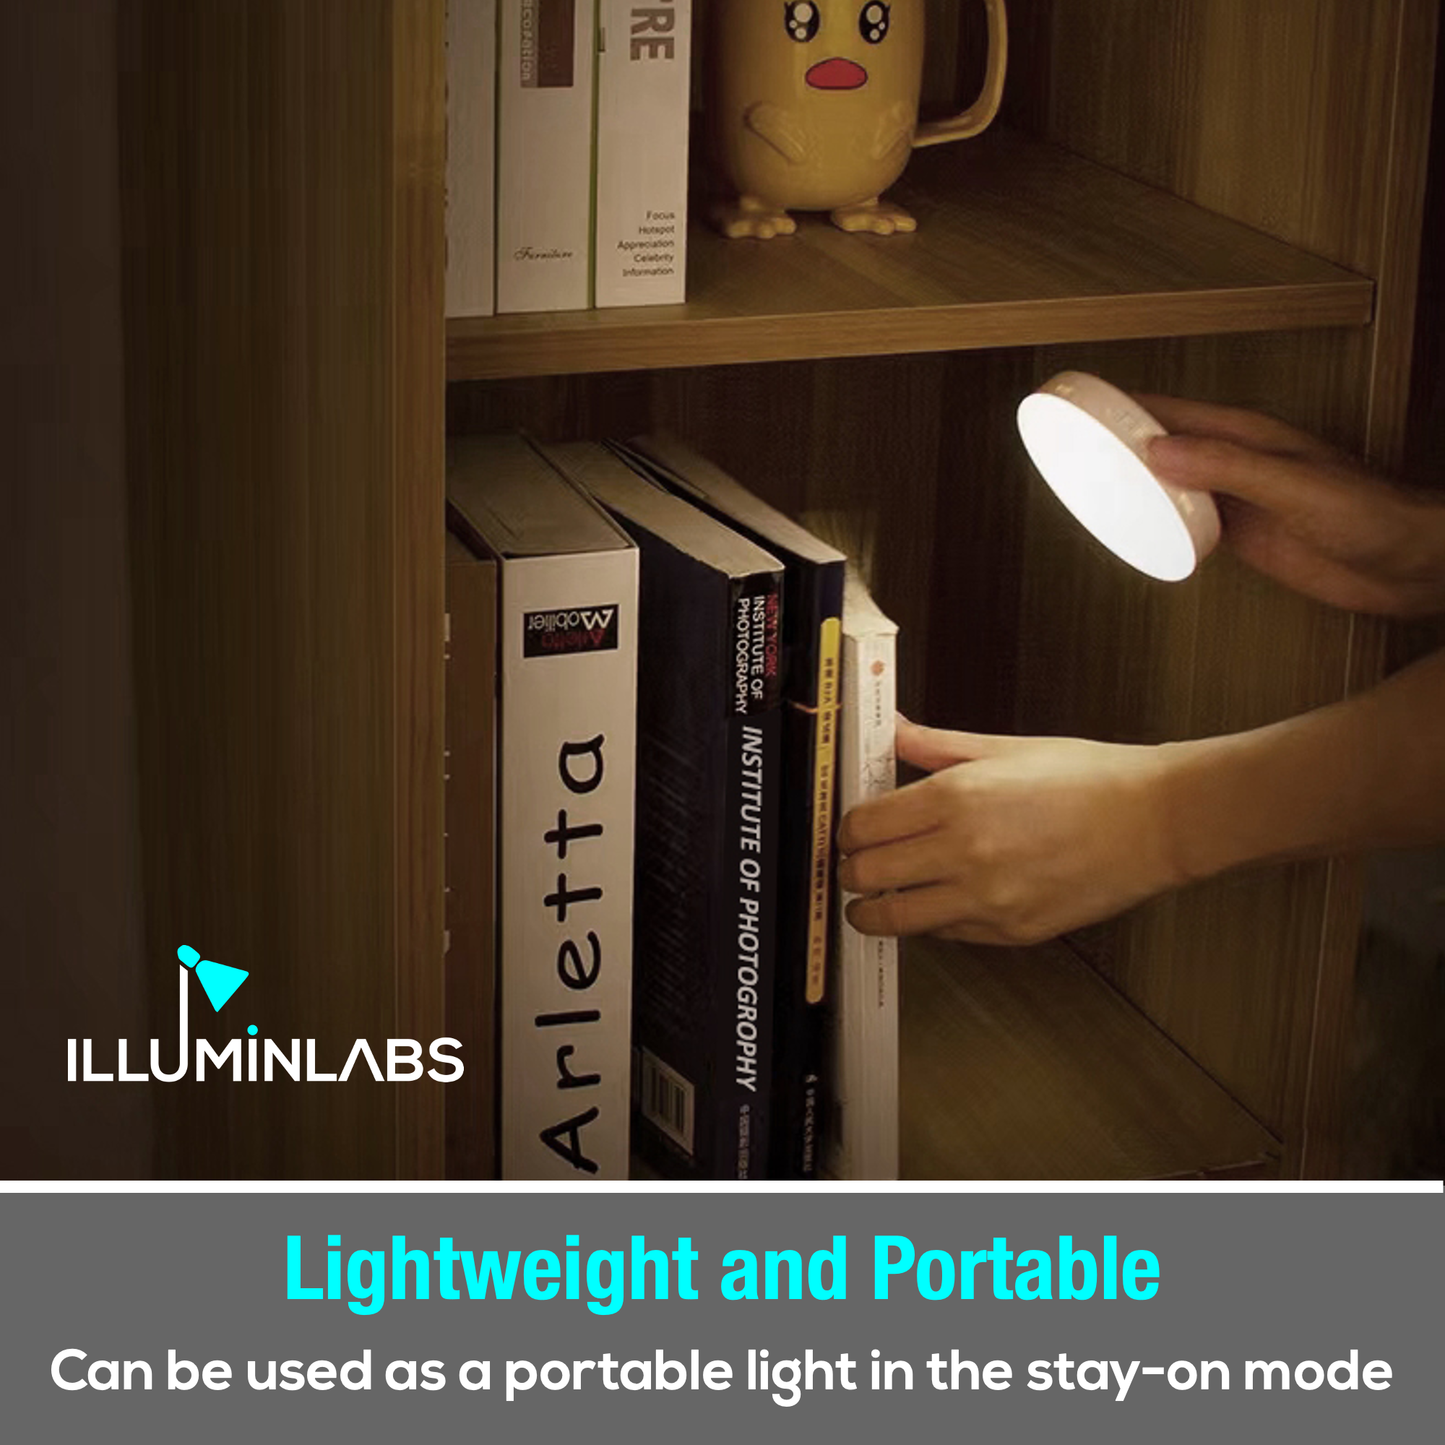 Rechargeable Dimmable Motion-Sensor Night Lights